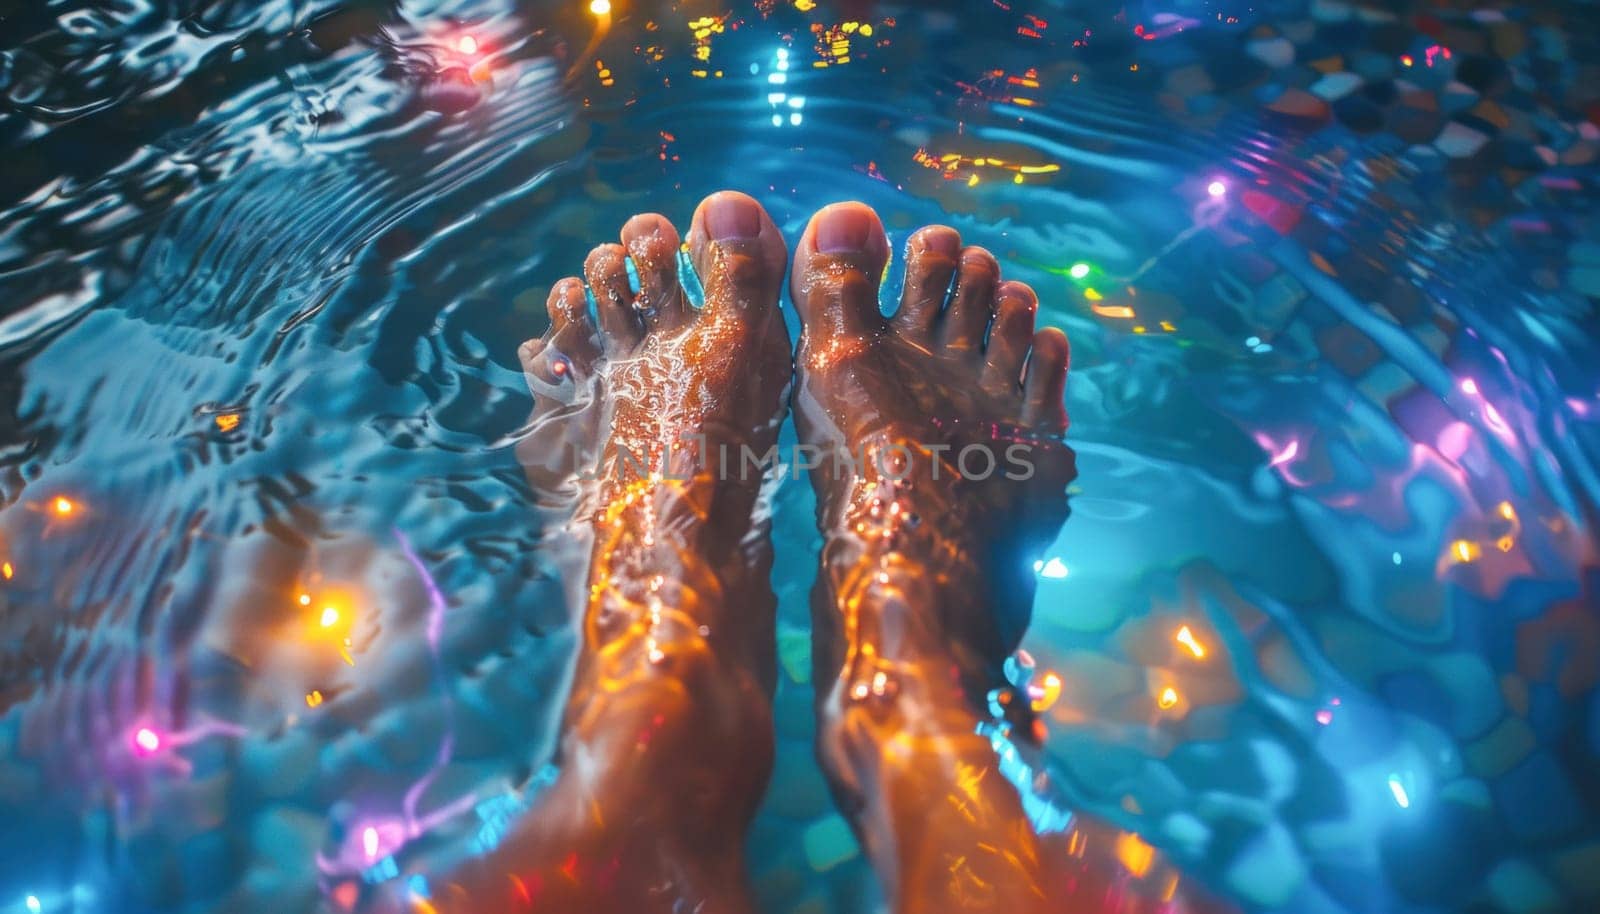 A persons feet are dipped in a pool of water, while vibrant lights create an electric blue ambience around them